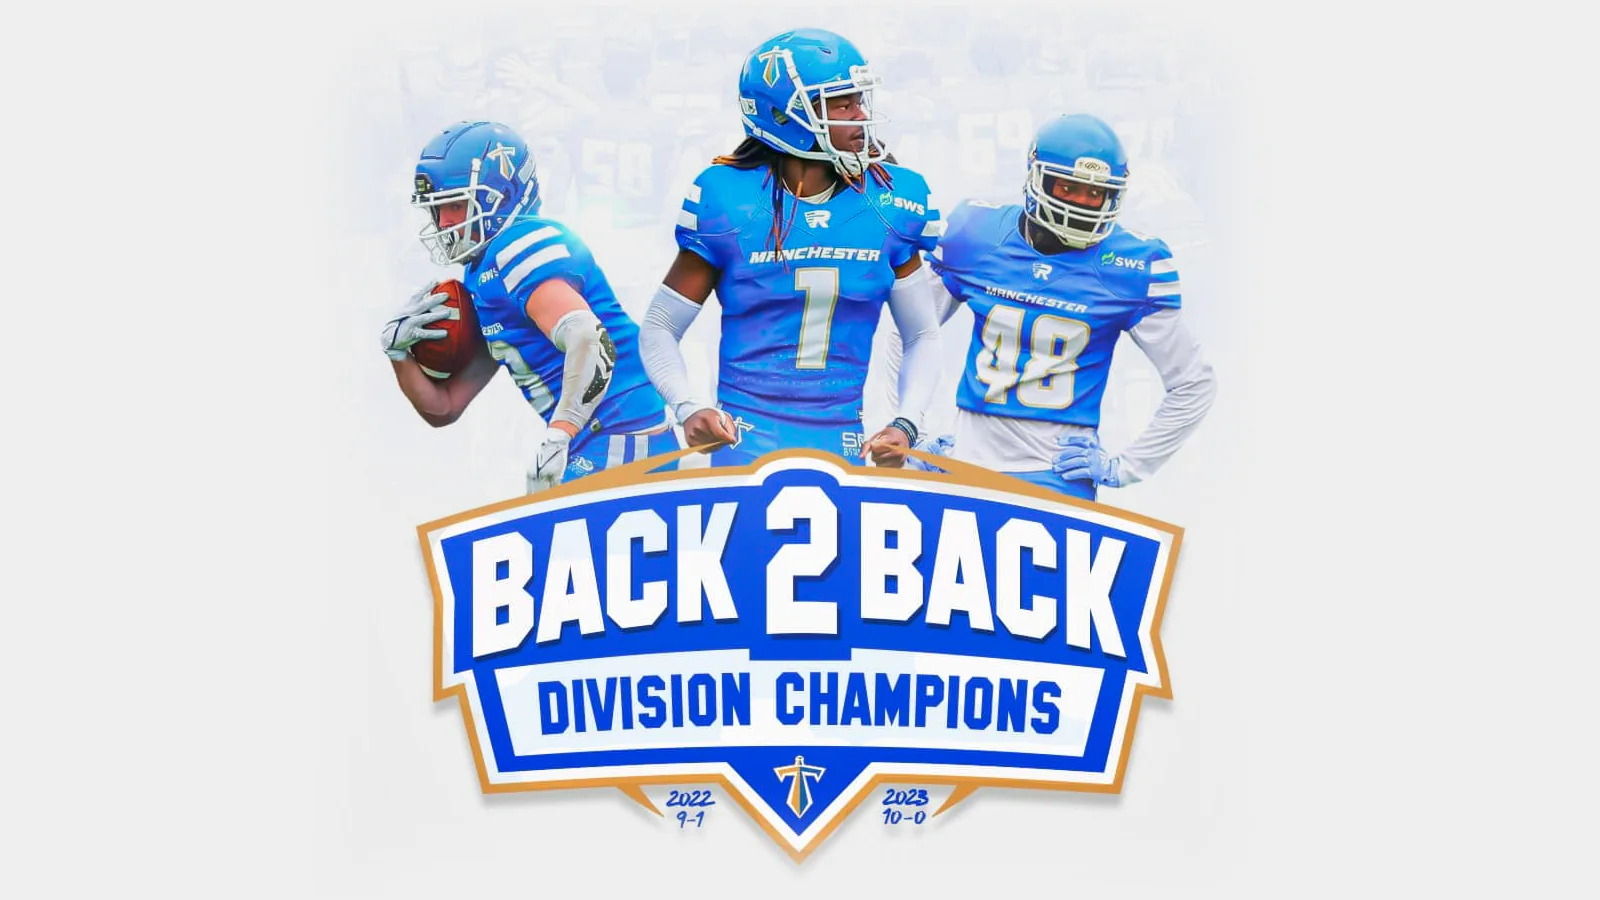 Back to Back champions